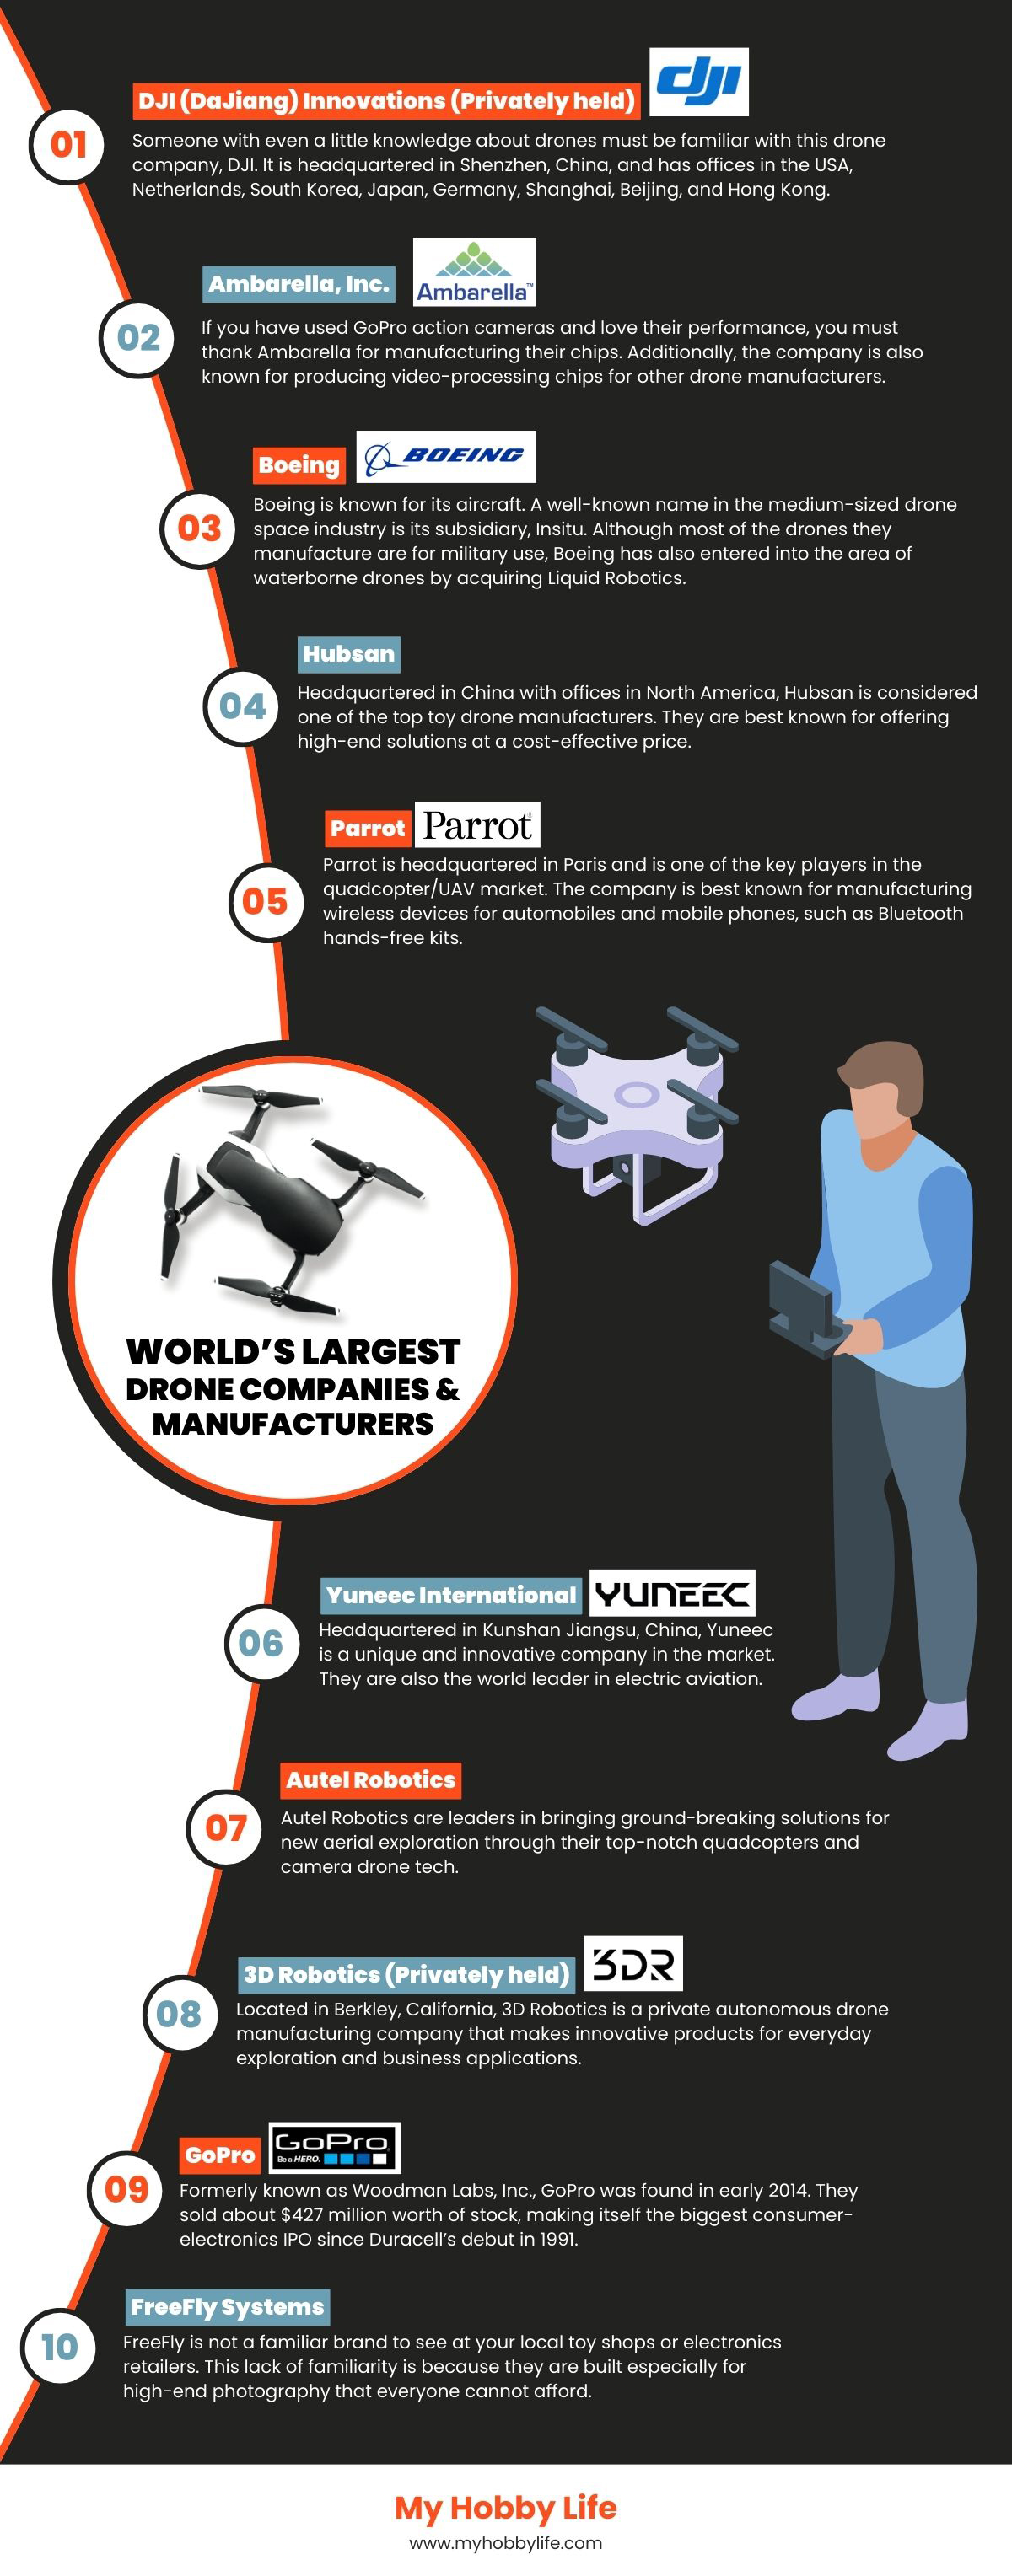 World’s Largest Drone Companies and Manufacturers